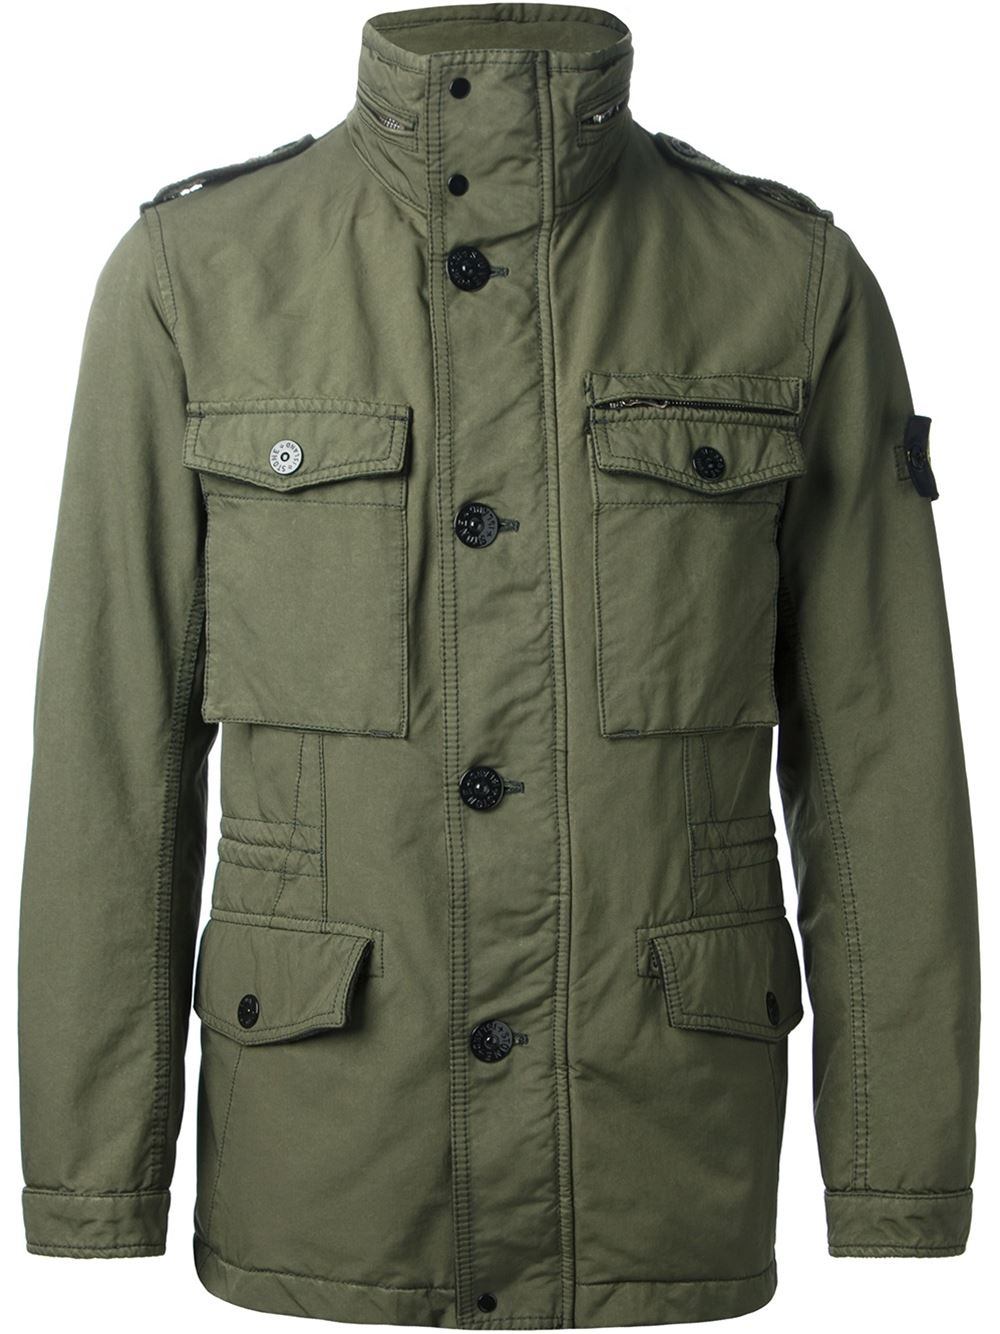 Stone Island Military Jacket in Green for Men - Lyst